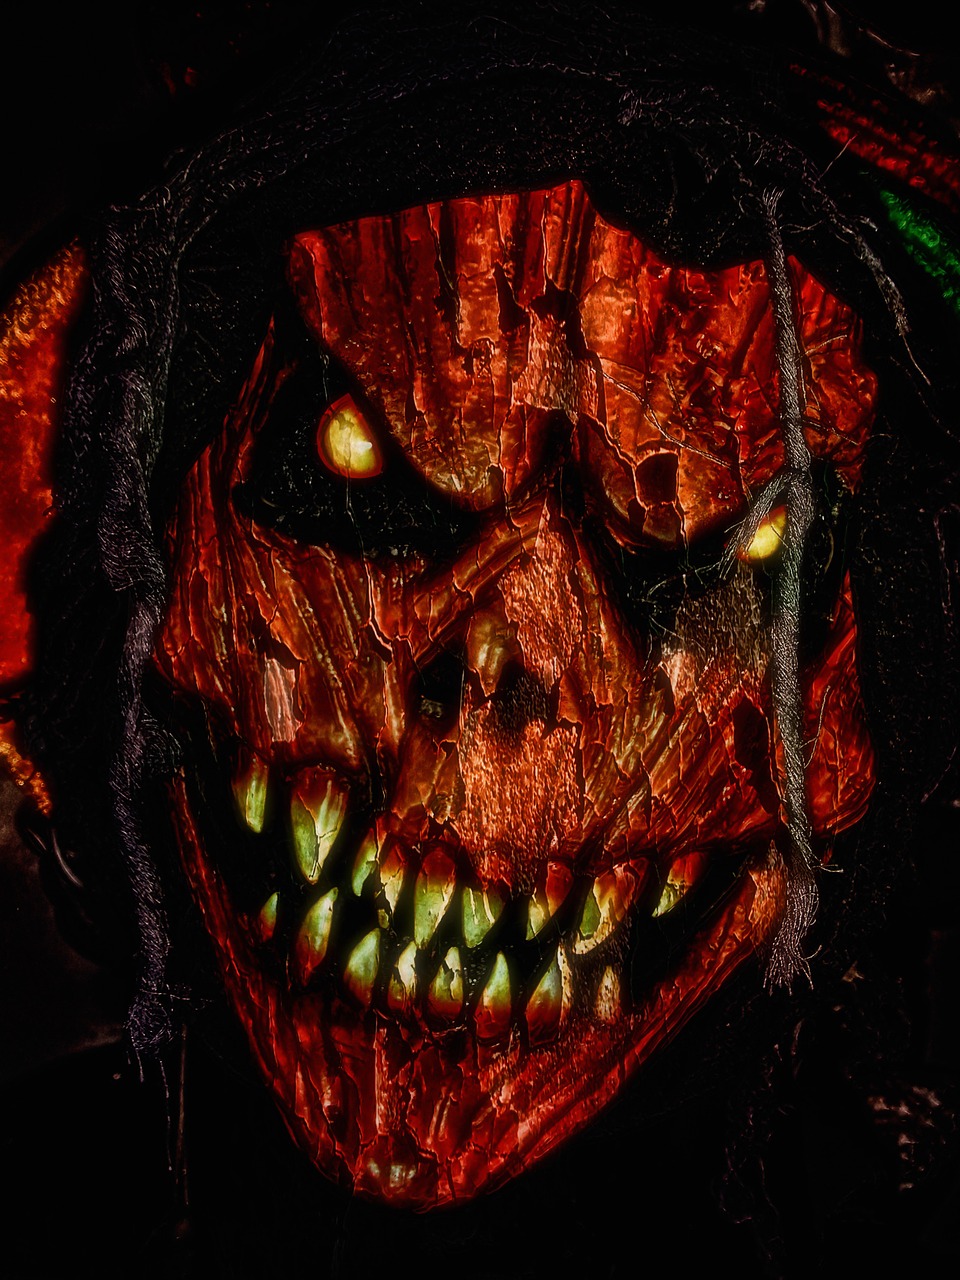 a close up of a scary face in the dark, a digital rendering, digital art, darksiders halloween theme, scarecrow, a devilish grin on his face, tortured face made of wood